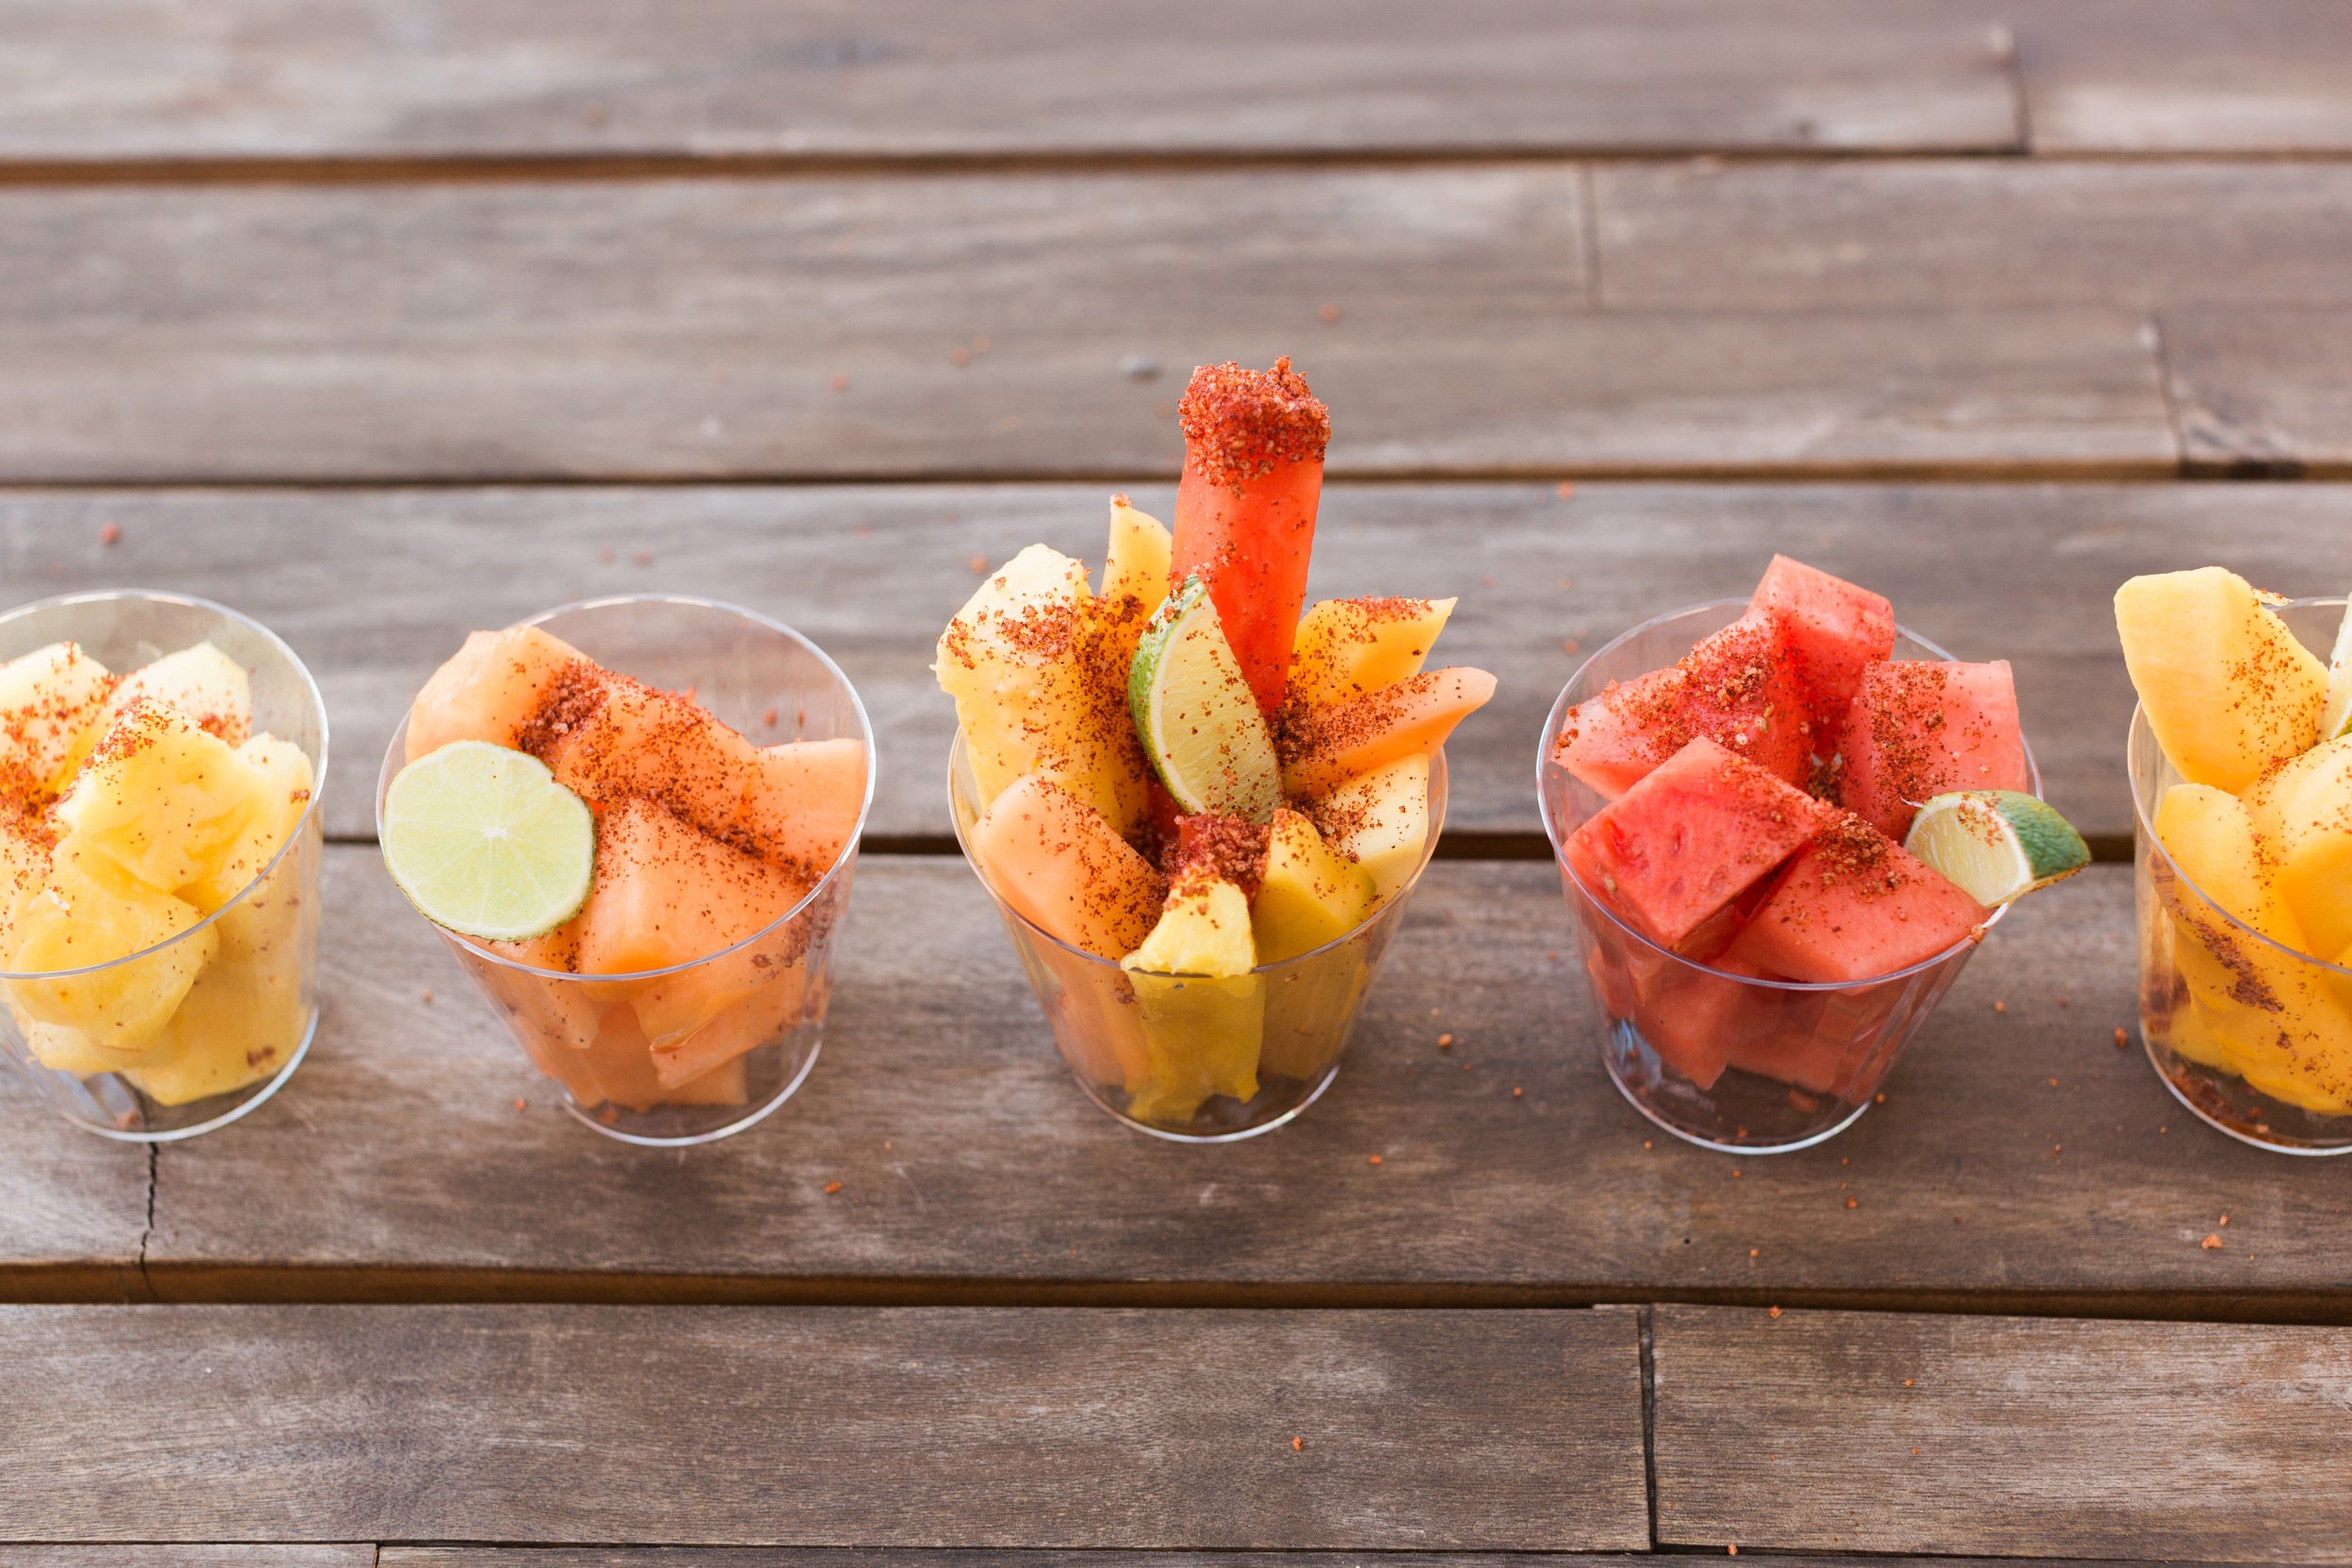 Desert Provisions Fruit Cup With Red Chile Salt.jpg